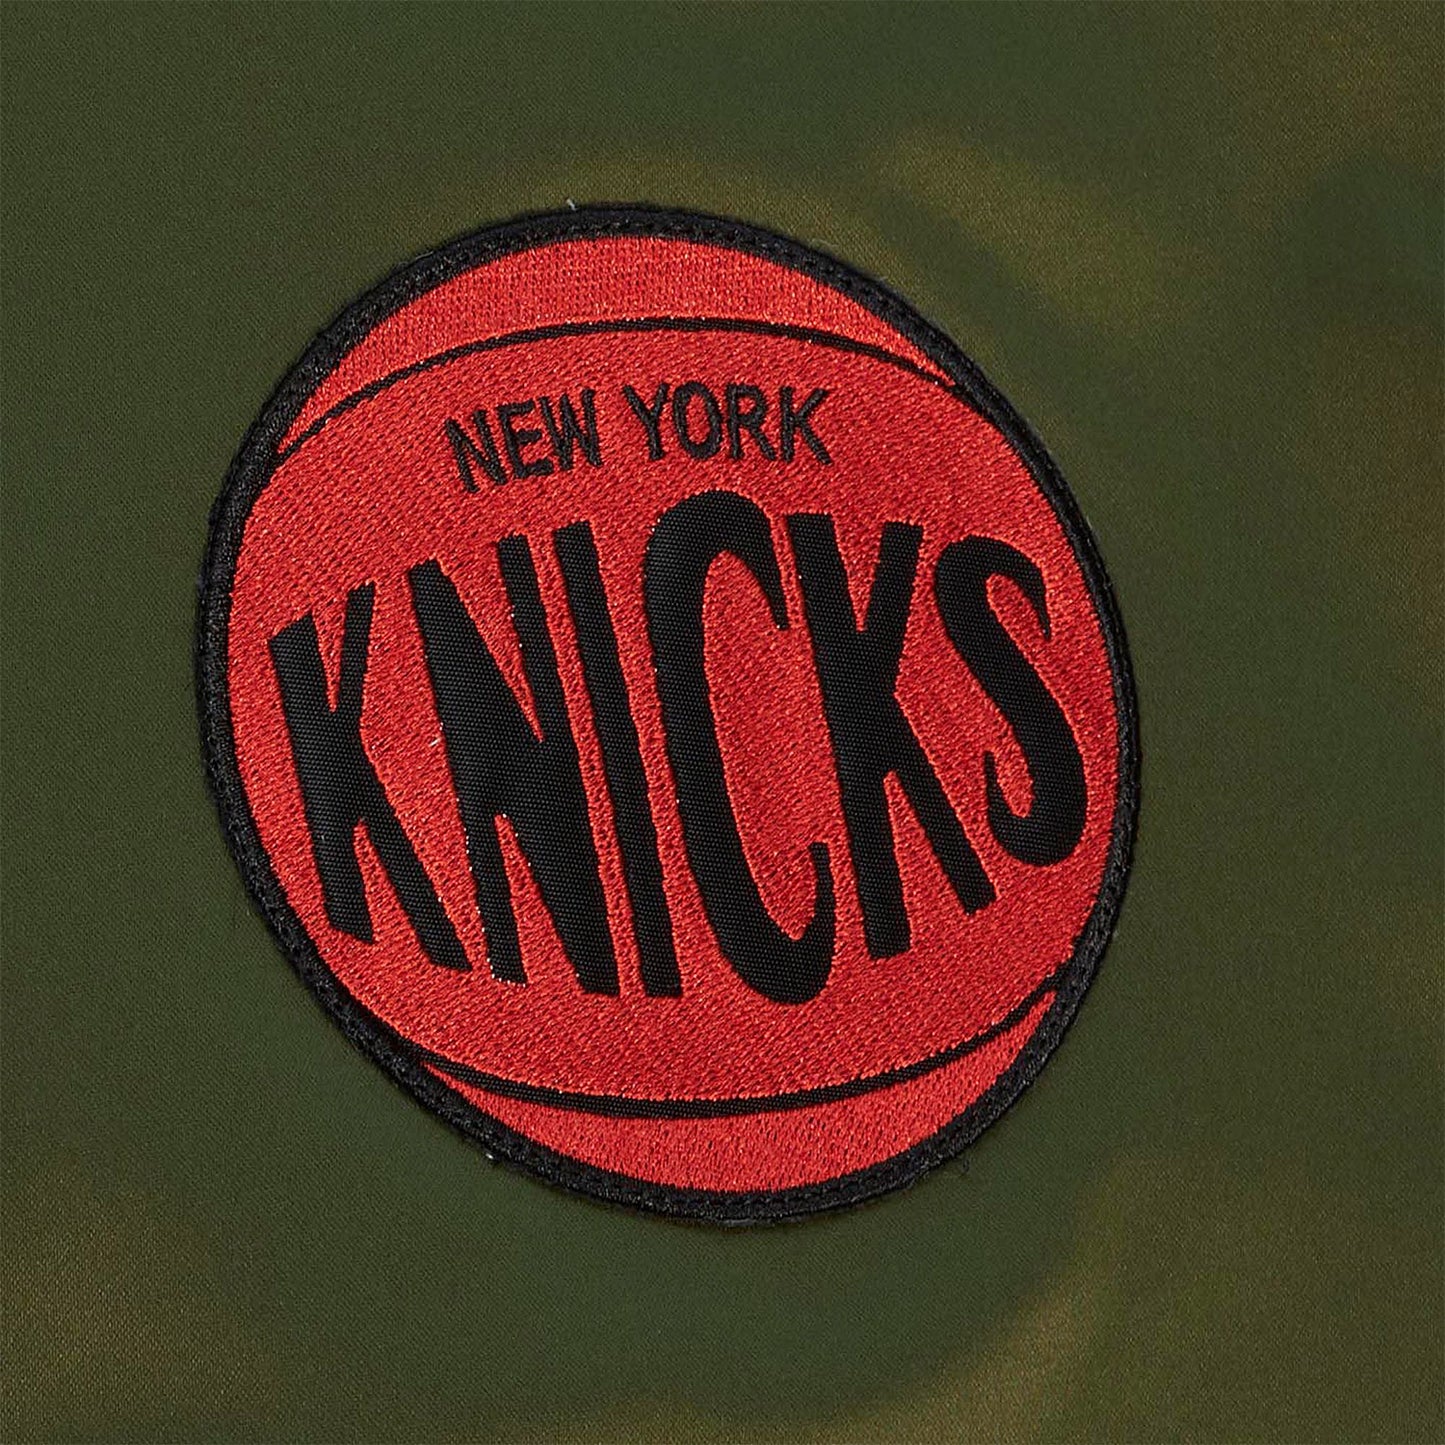 Mitchell & Ness Knicks Flight Satin Bomber Jacket In Green - Zoom View On Left Upper Chest Graphic